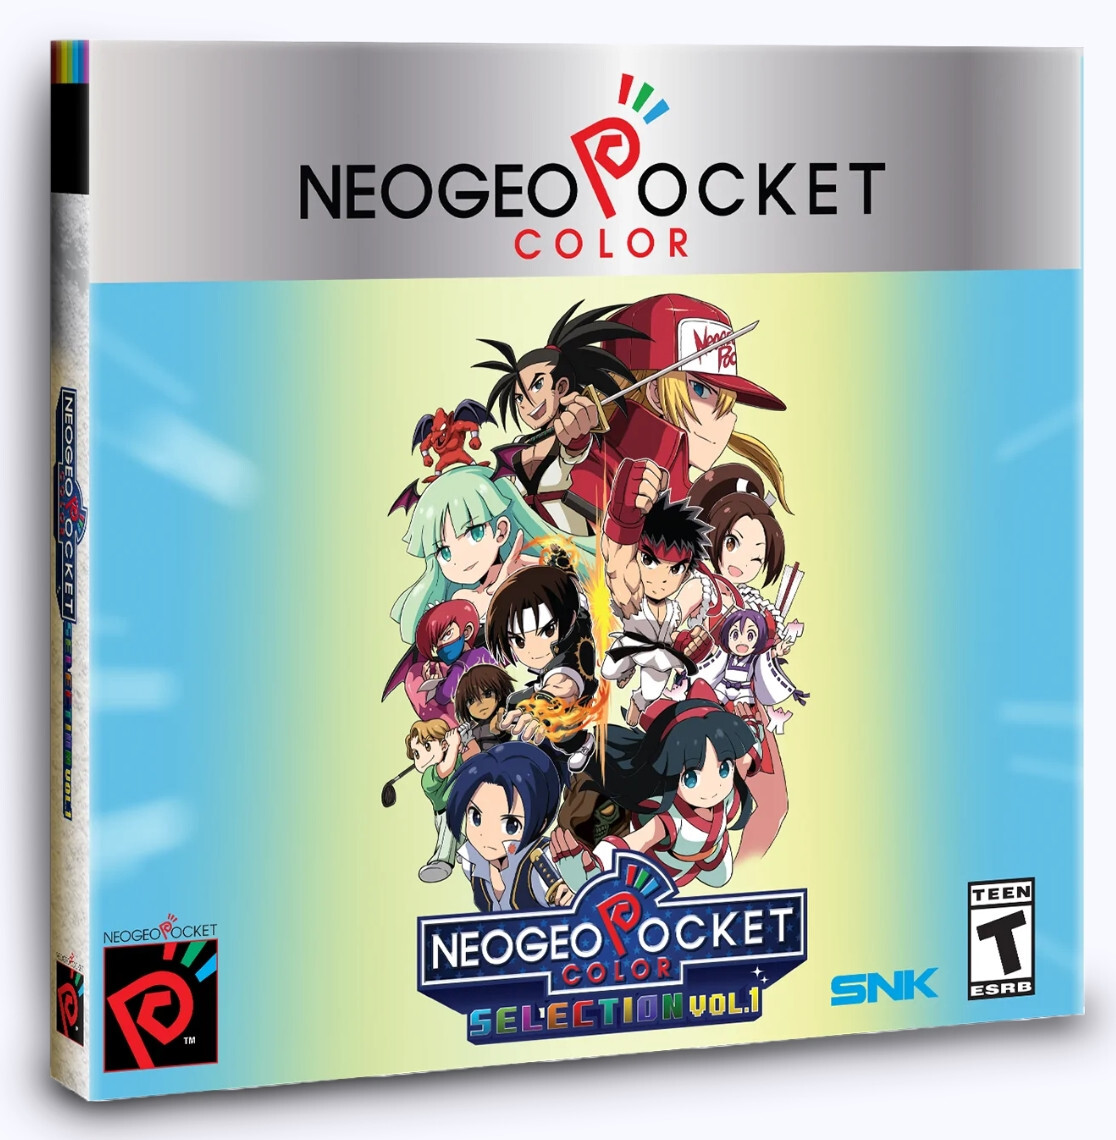 Limited Run NeoGeo Pocket Color Selection Vol. 1 Classic Edition Games) Nintendo Switch